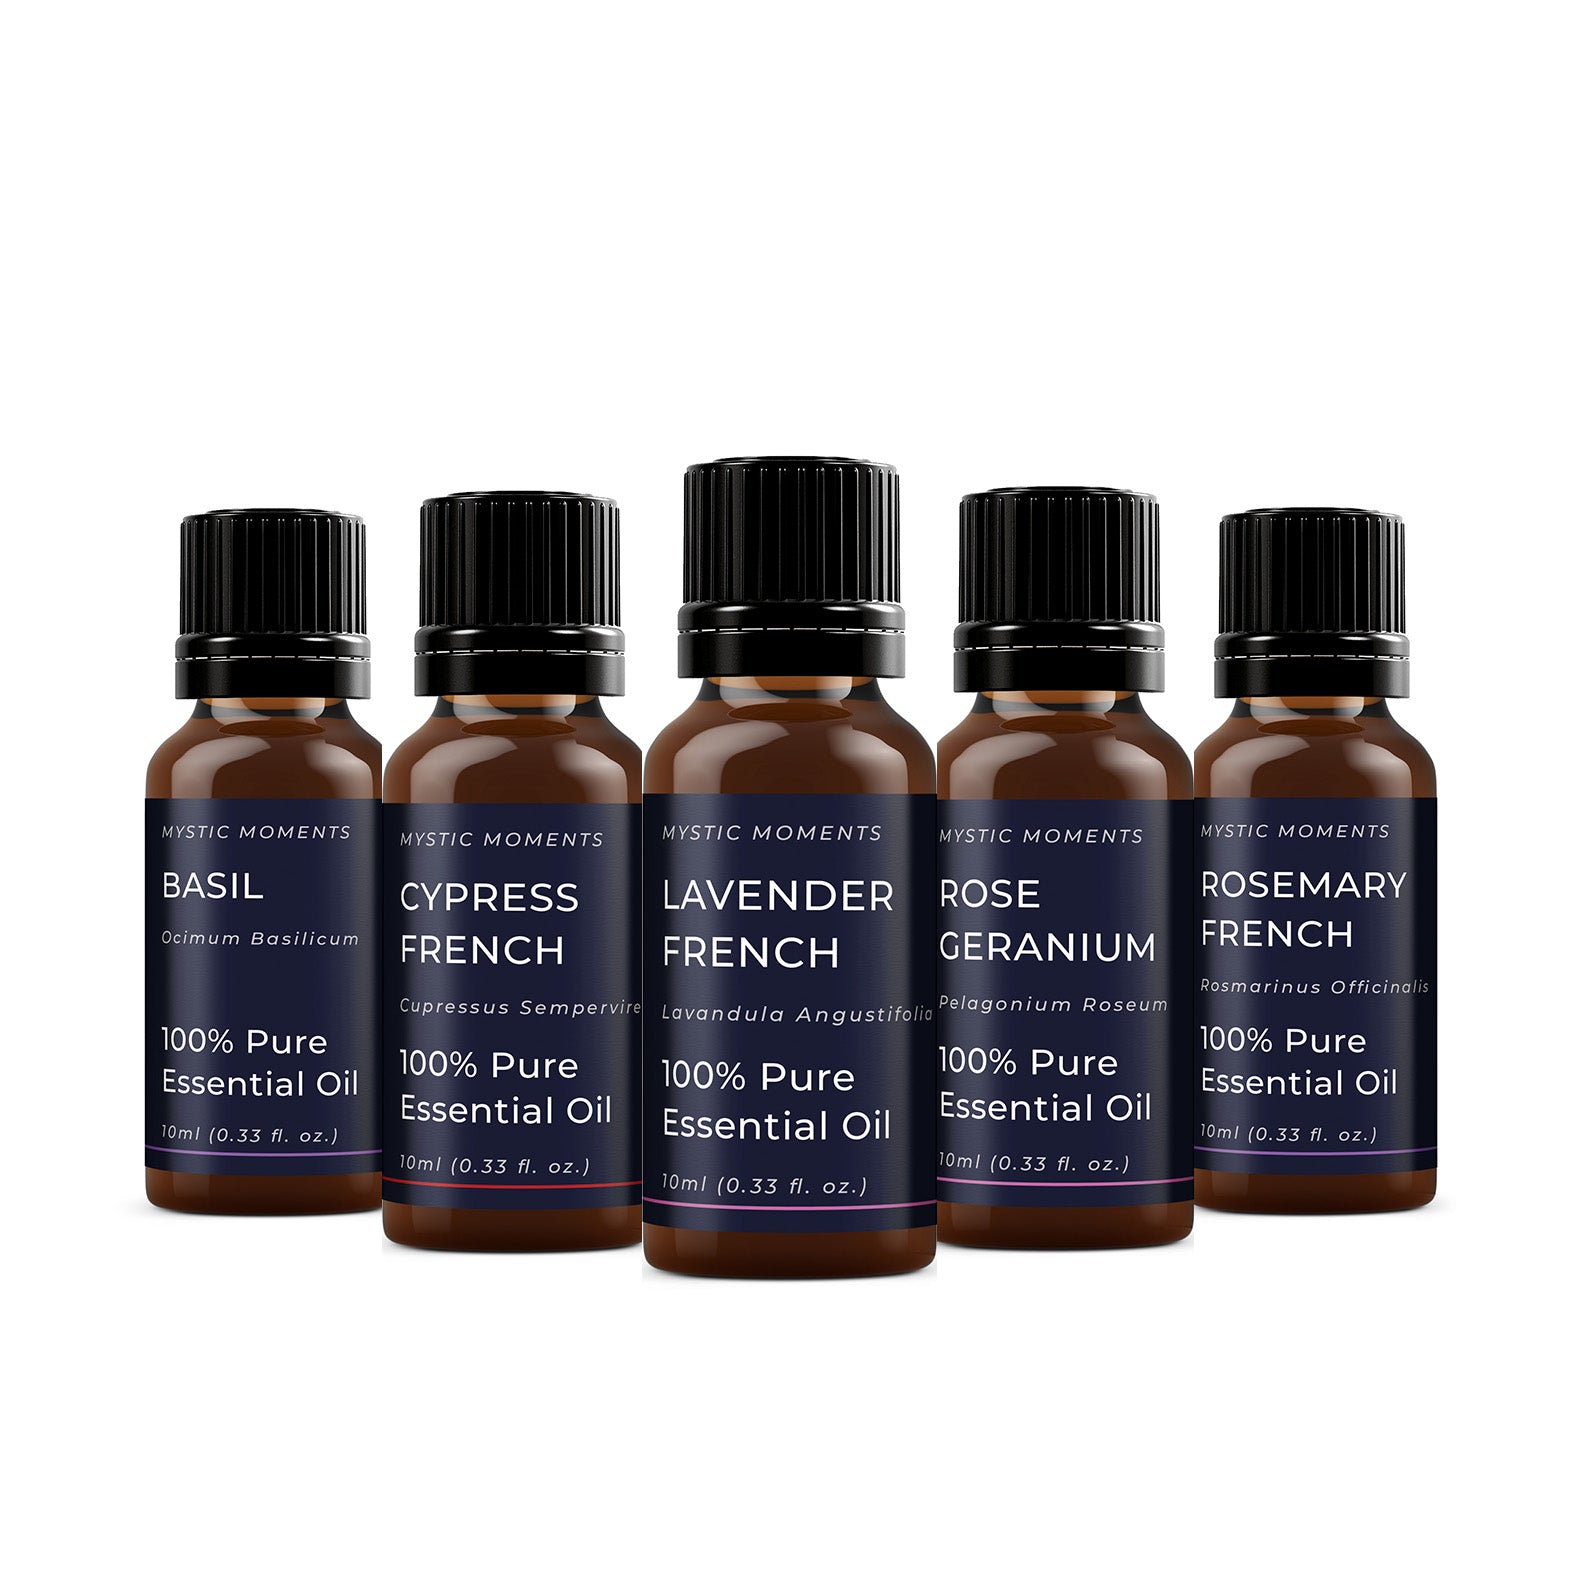 Mystic Moments the Organic Essential Selection 12 Pure Essential